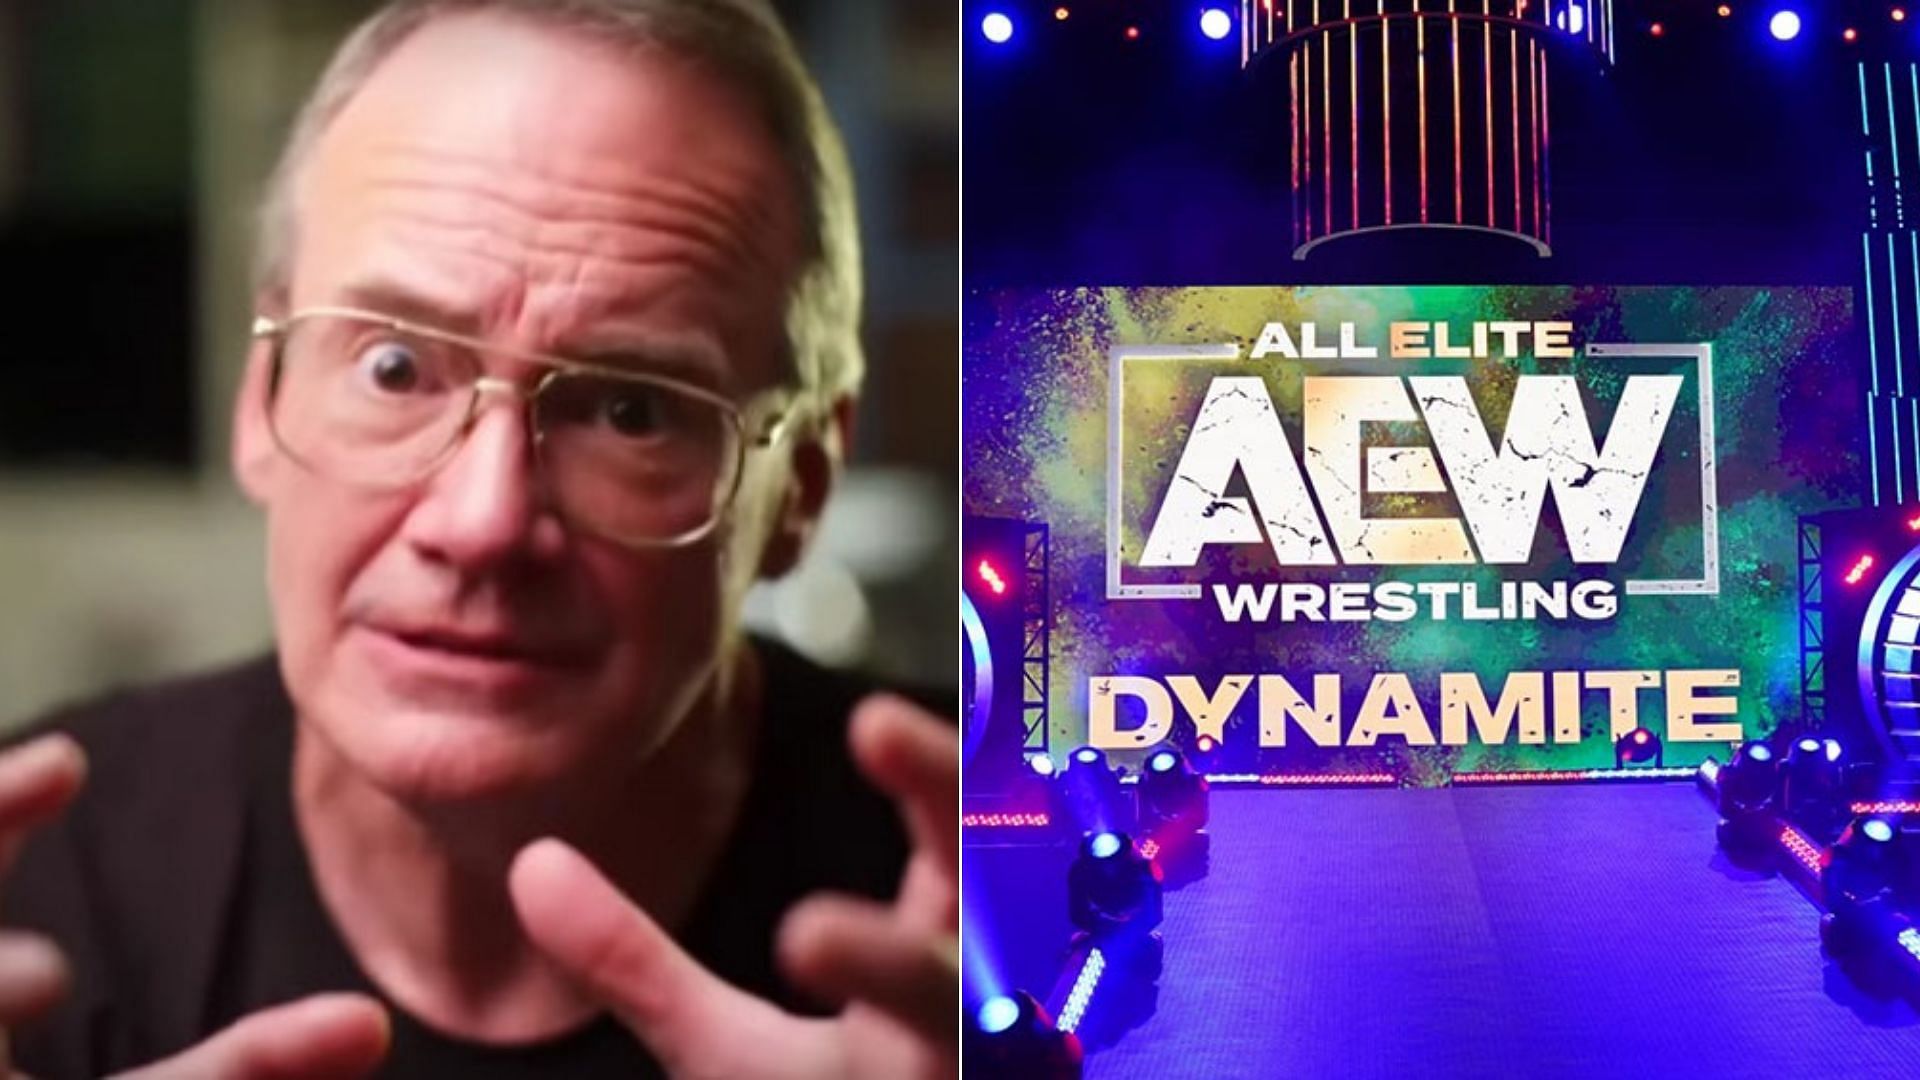 Jim Cornette is never afraid to share his opinions regarding the AEW product